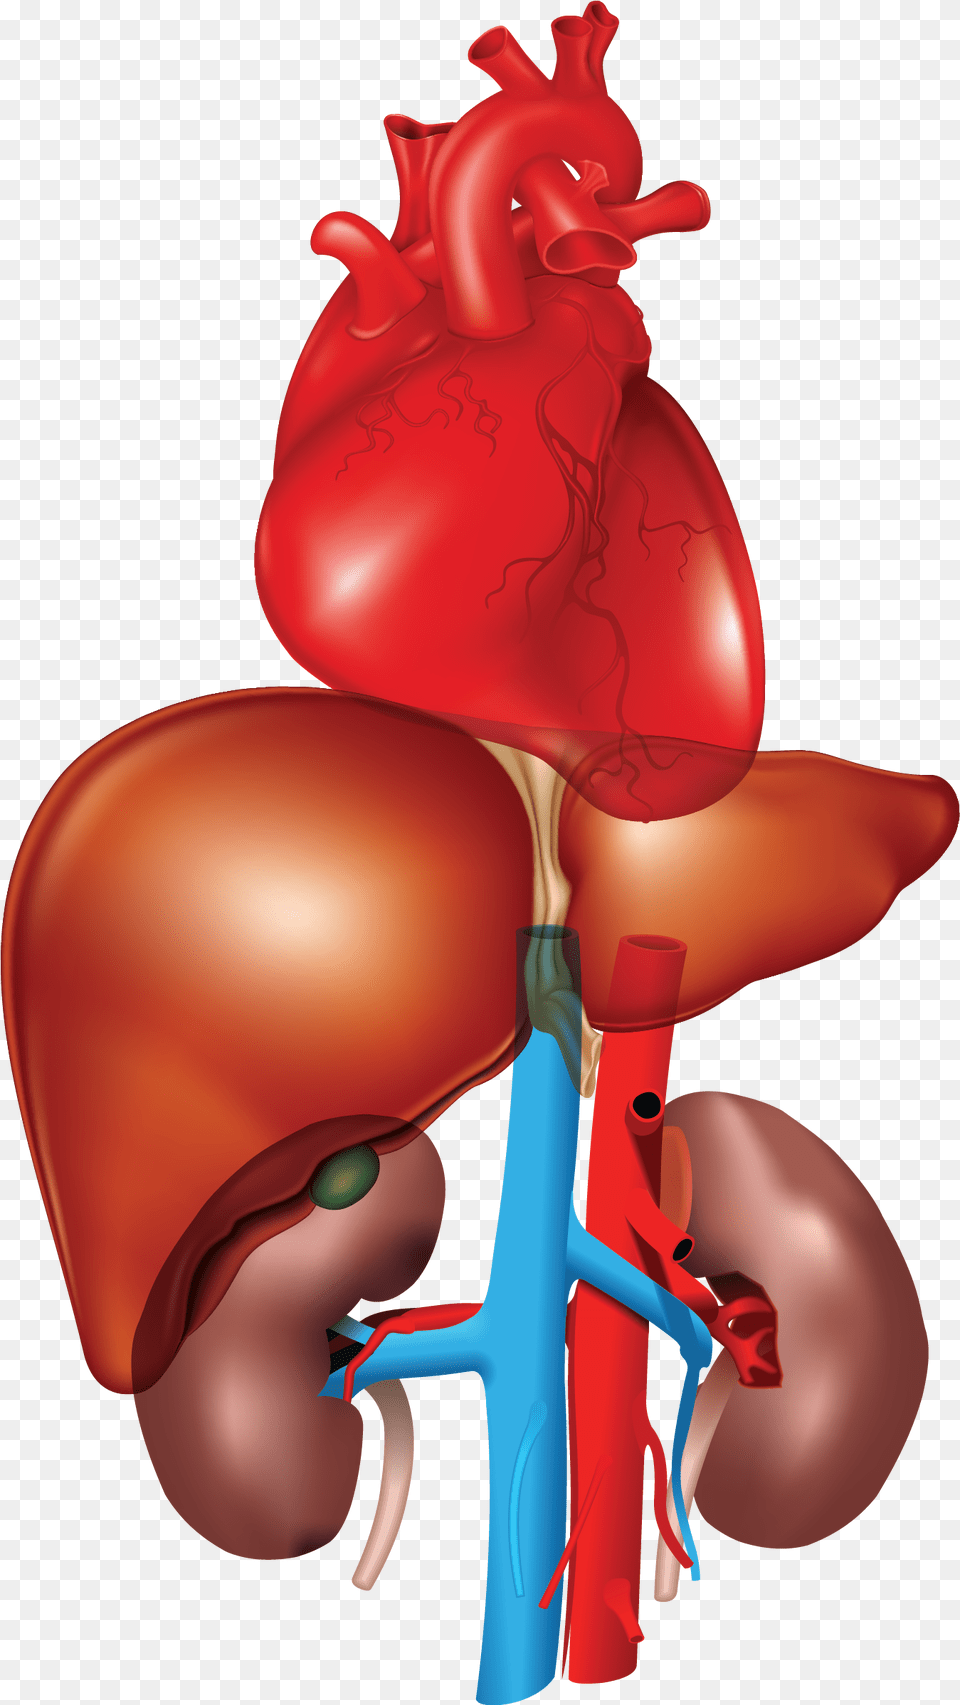 Heart Liver Kidney Kidney Liver And Heart, Body Part, Face, Head, Neck Free Transparent Png